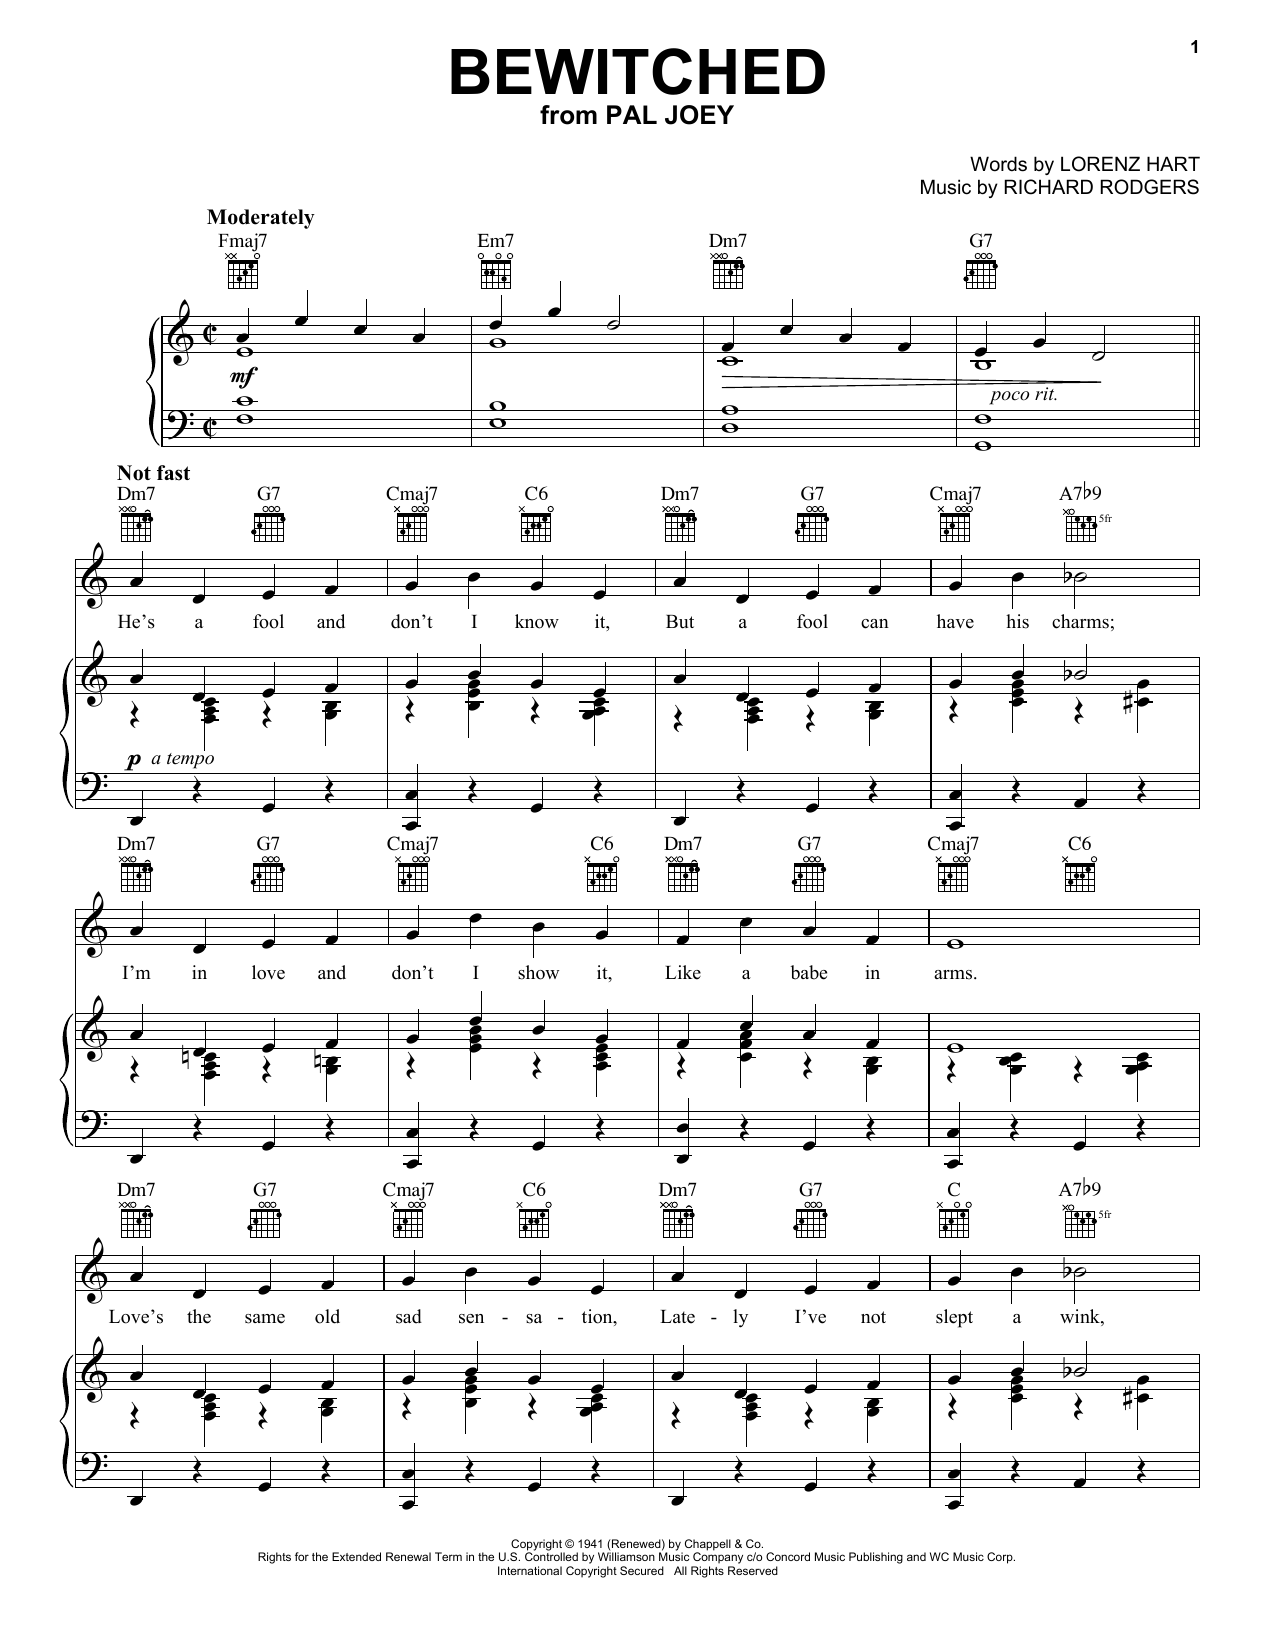 Frank Sinatra Bewitched sheet music notes printable PDF score